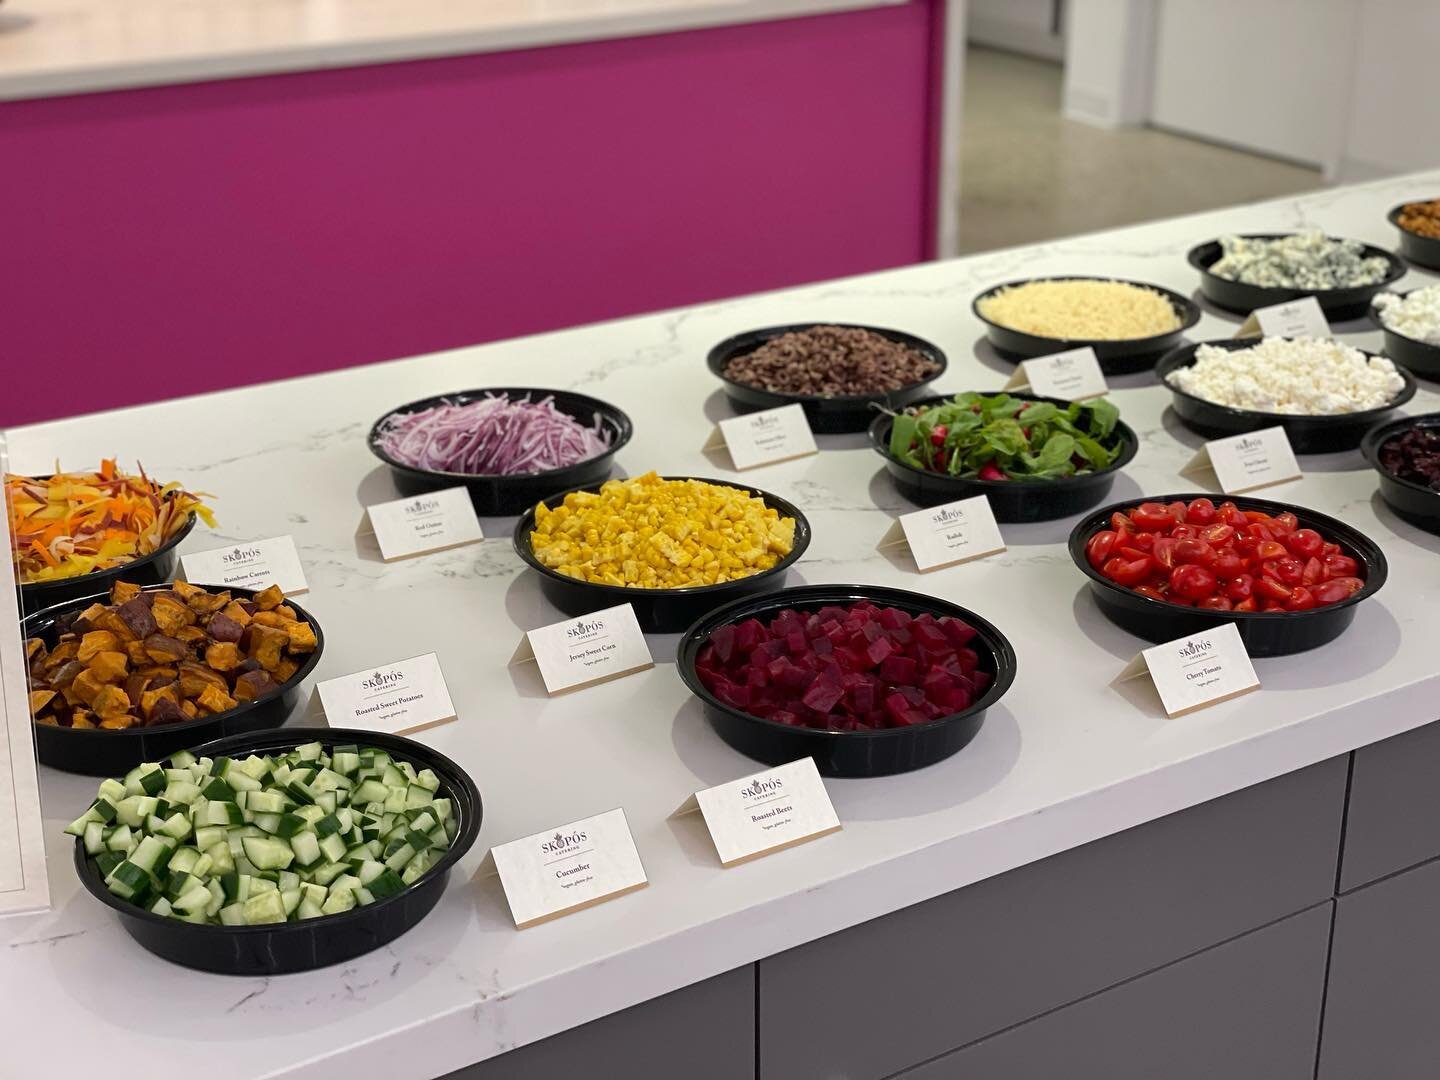 &lsquo;Build Your Own&rsquo; Salad Bar for a large recurring corporate client, always a crowd-pleaser!
#SkoposCatering #NJ #NYC #CorporateCatering #NYCCatering #SaladBar #BuildYourOwn #HealthyEats #CorporateLunch #PrivateEvents